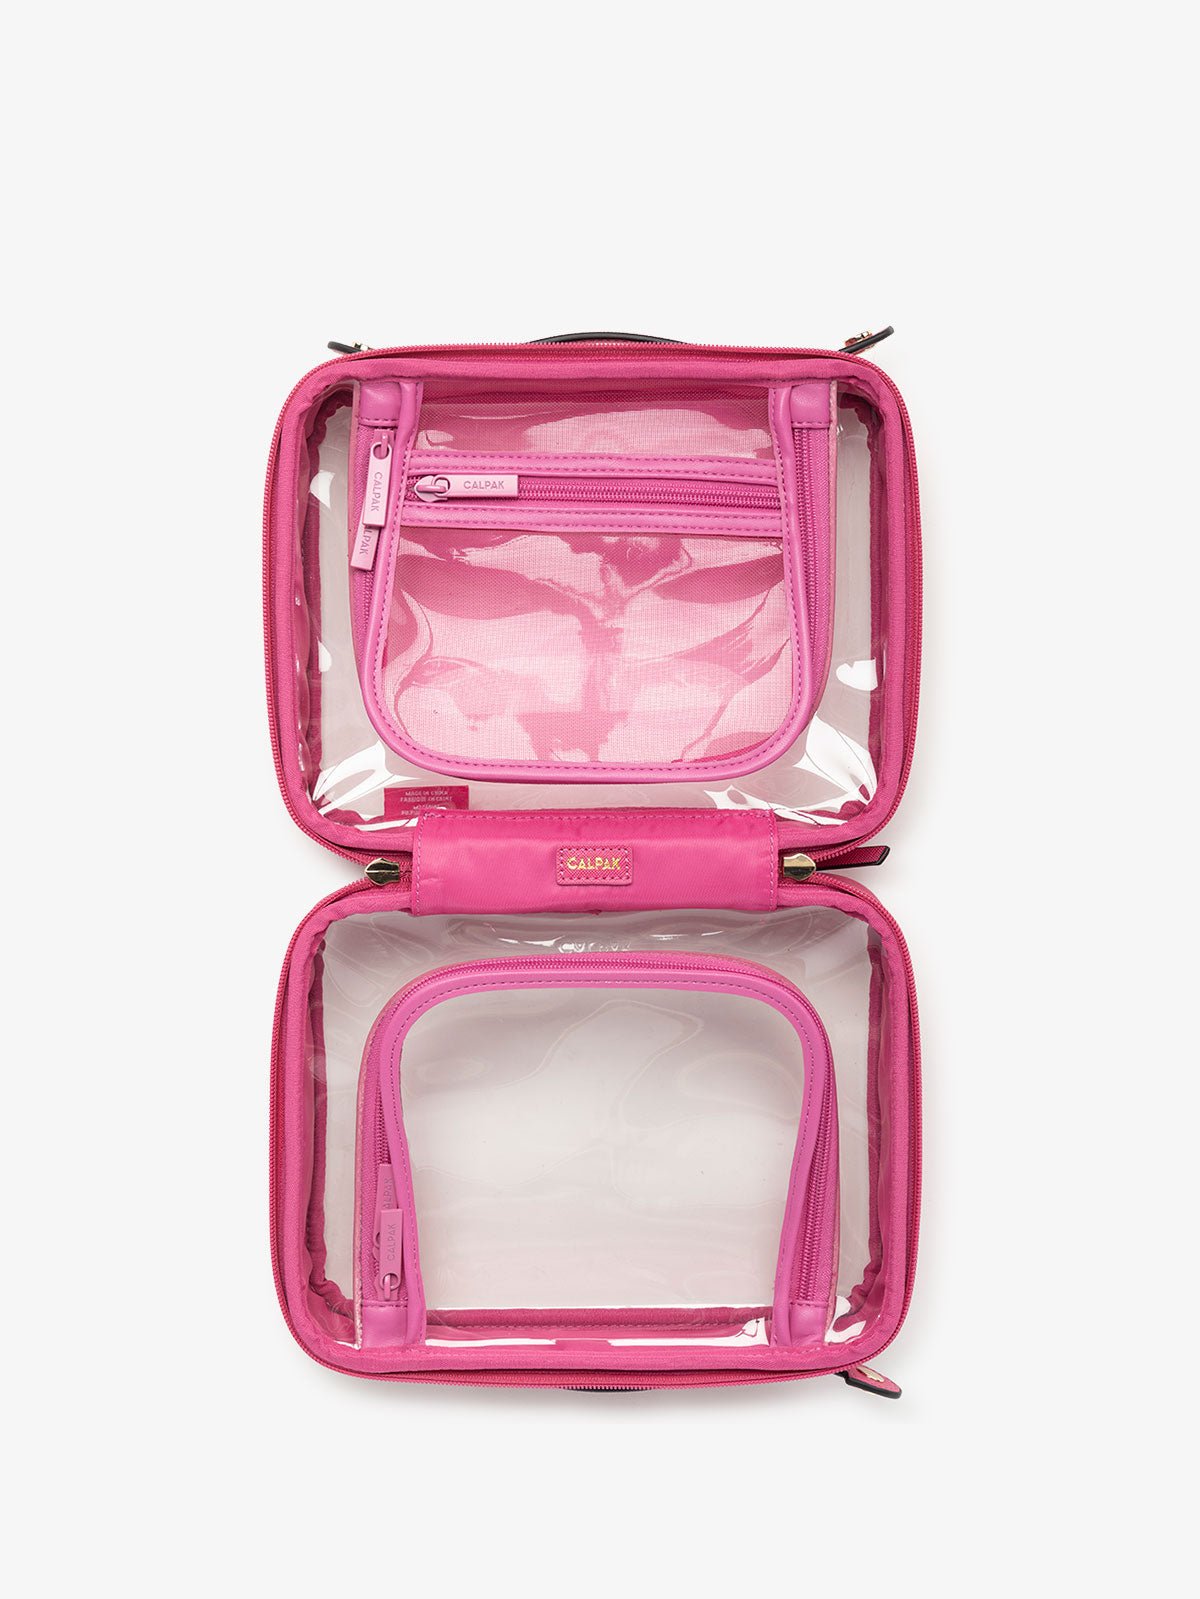 CALPAK clear skincare bag with multiple zippered compartments in dragonfruit pink